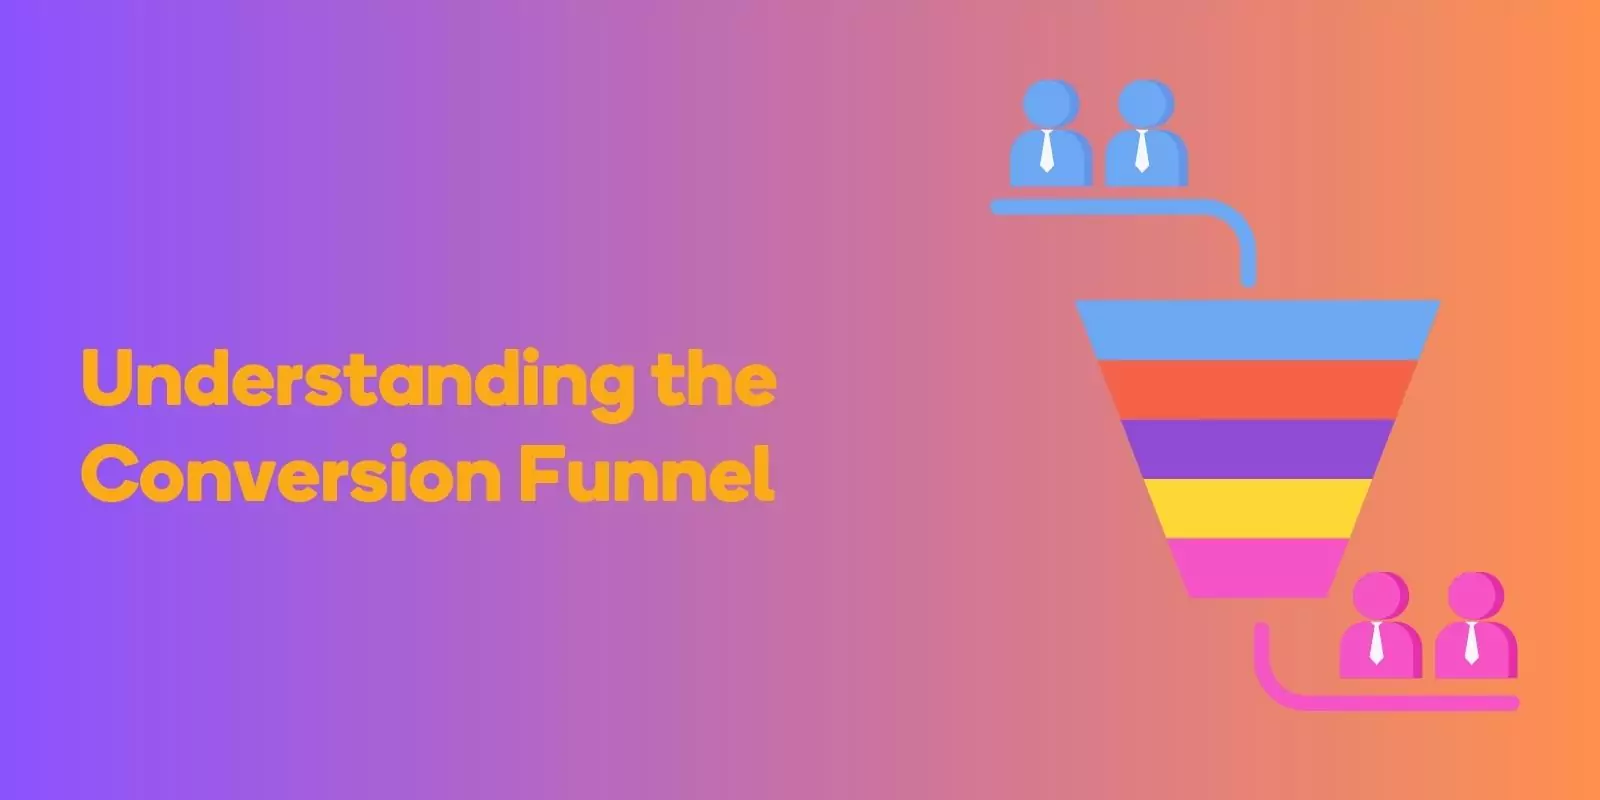 Understanding the Conversion Funnel